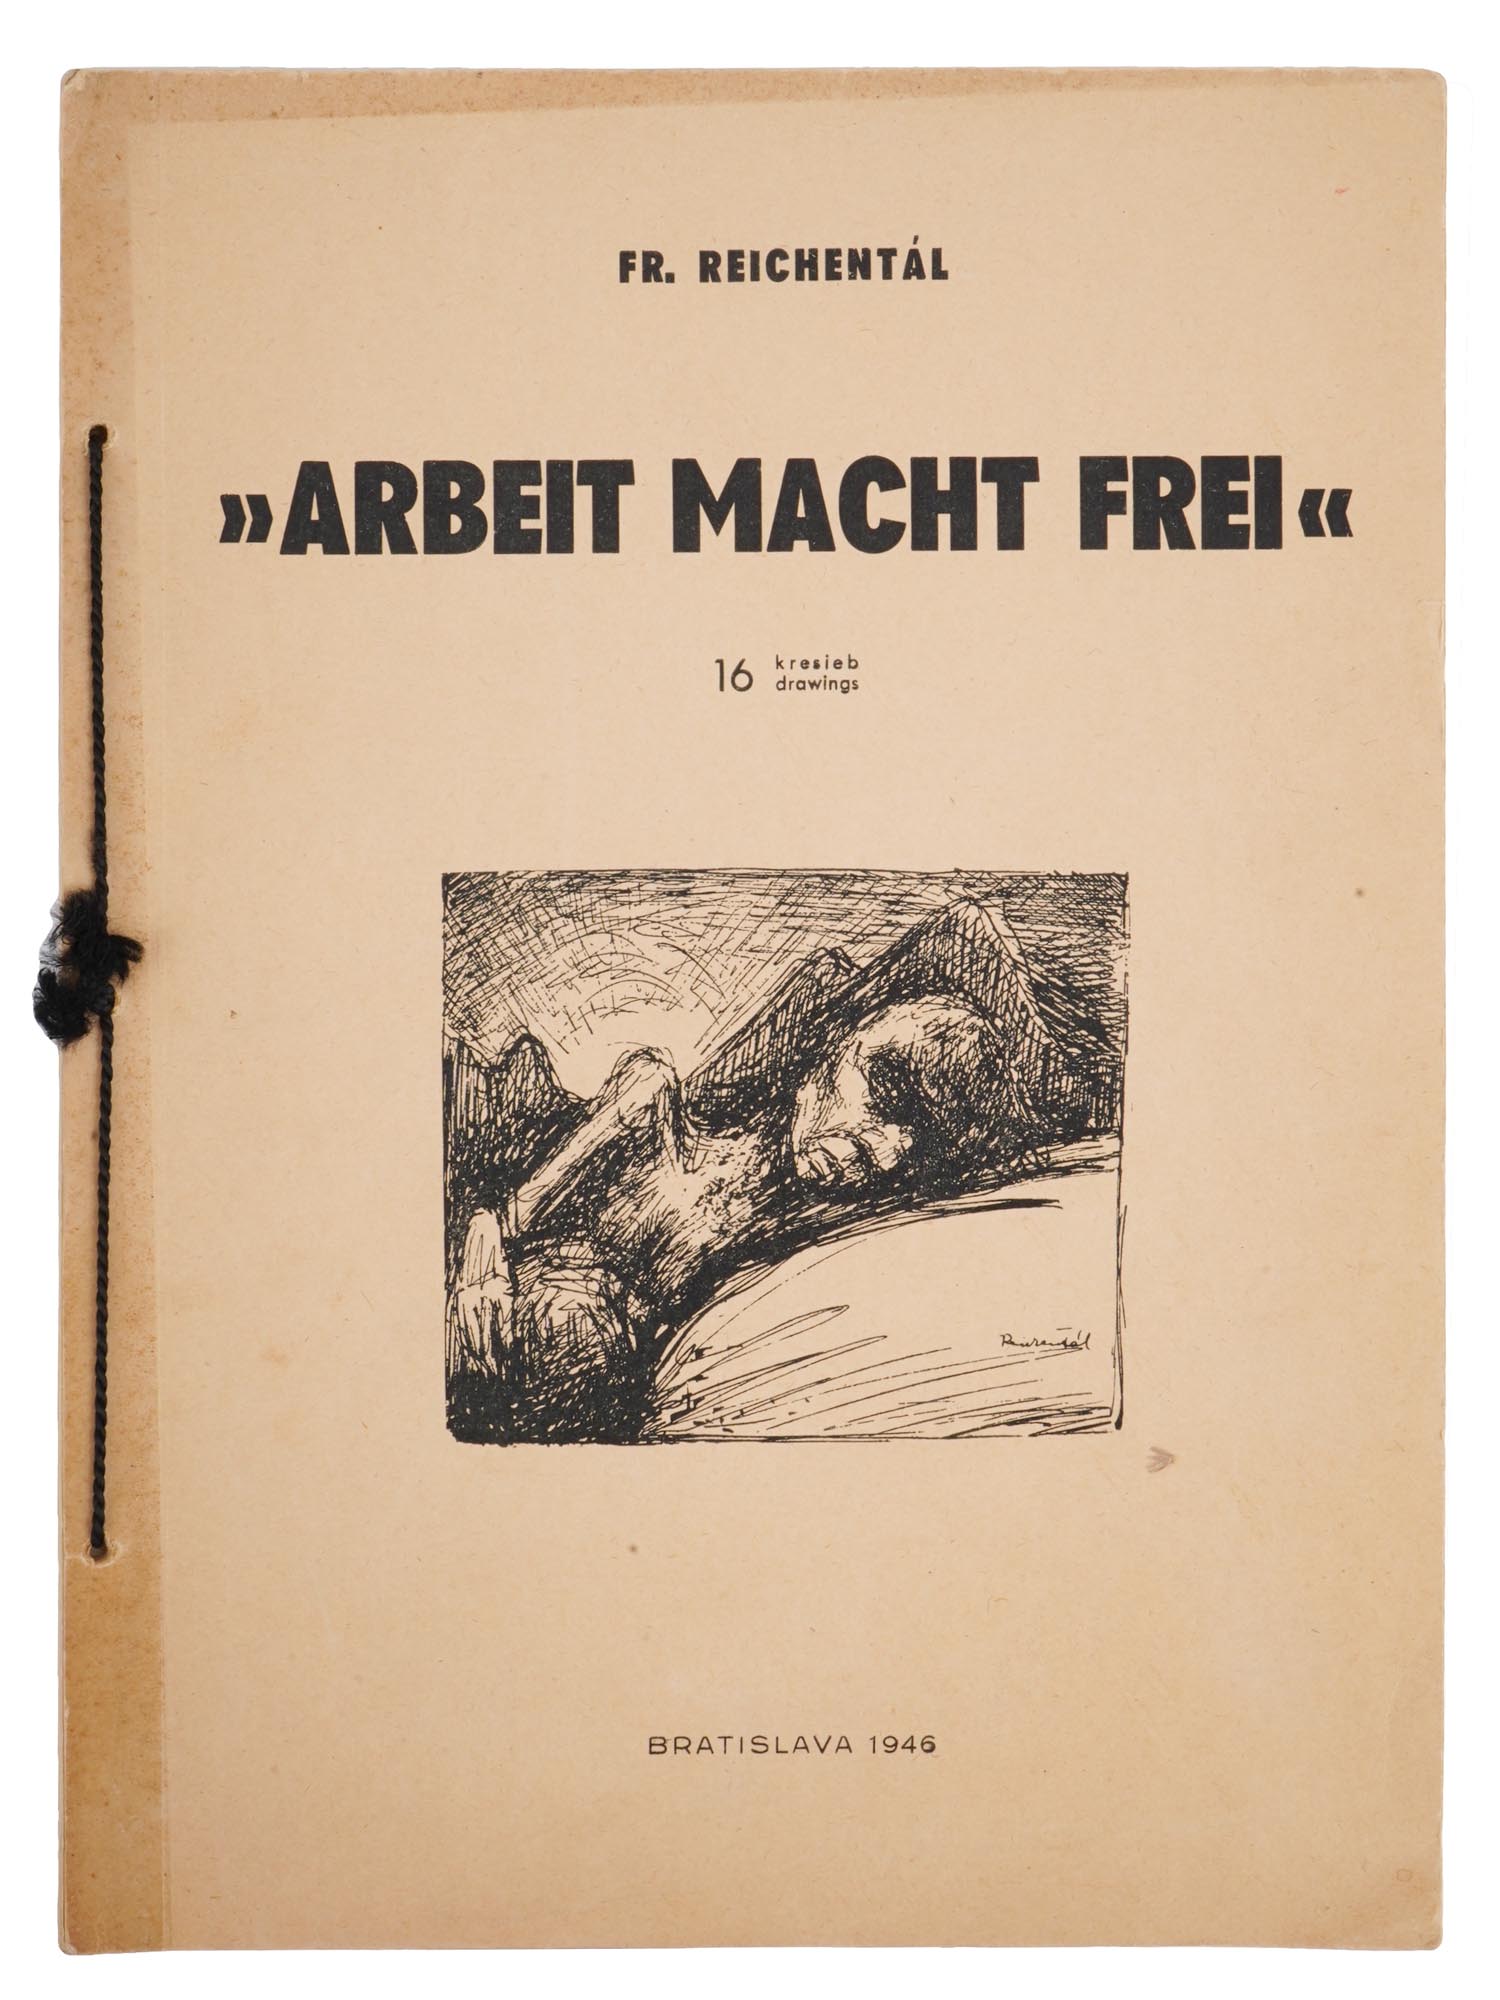 1946 SLOVAK HOLOCAUST ALBUM OF DRAWINGS BY REICHENTAL